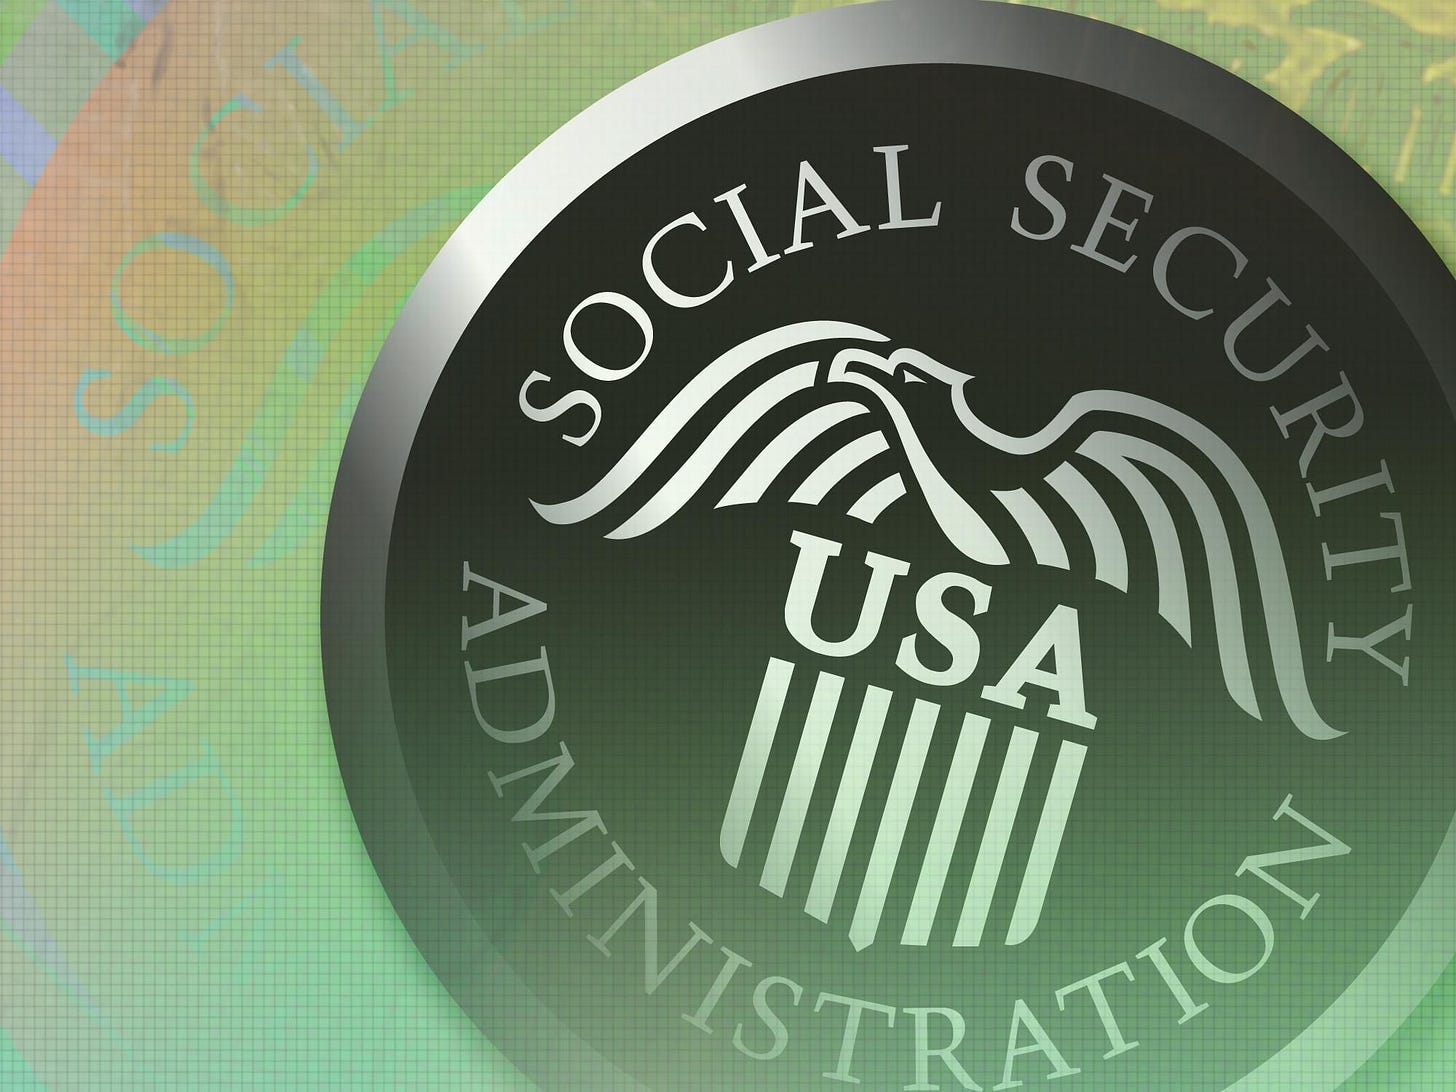 Social Security Administration announces new online reporting form for scam  calls